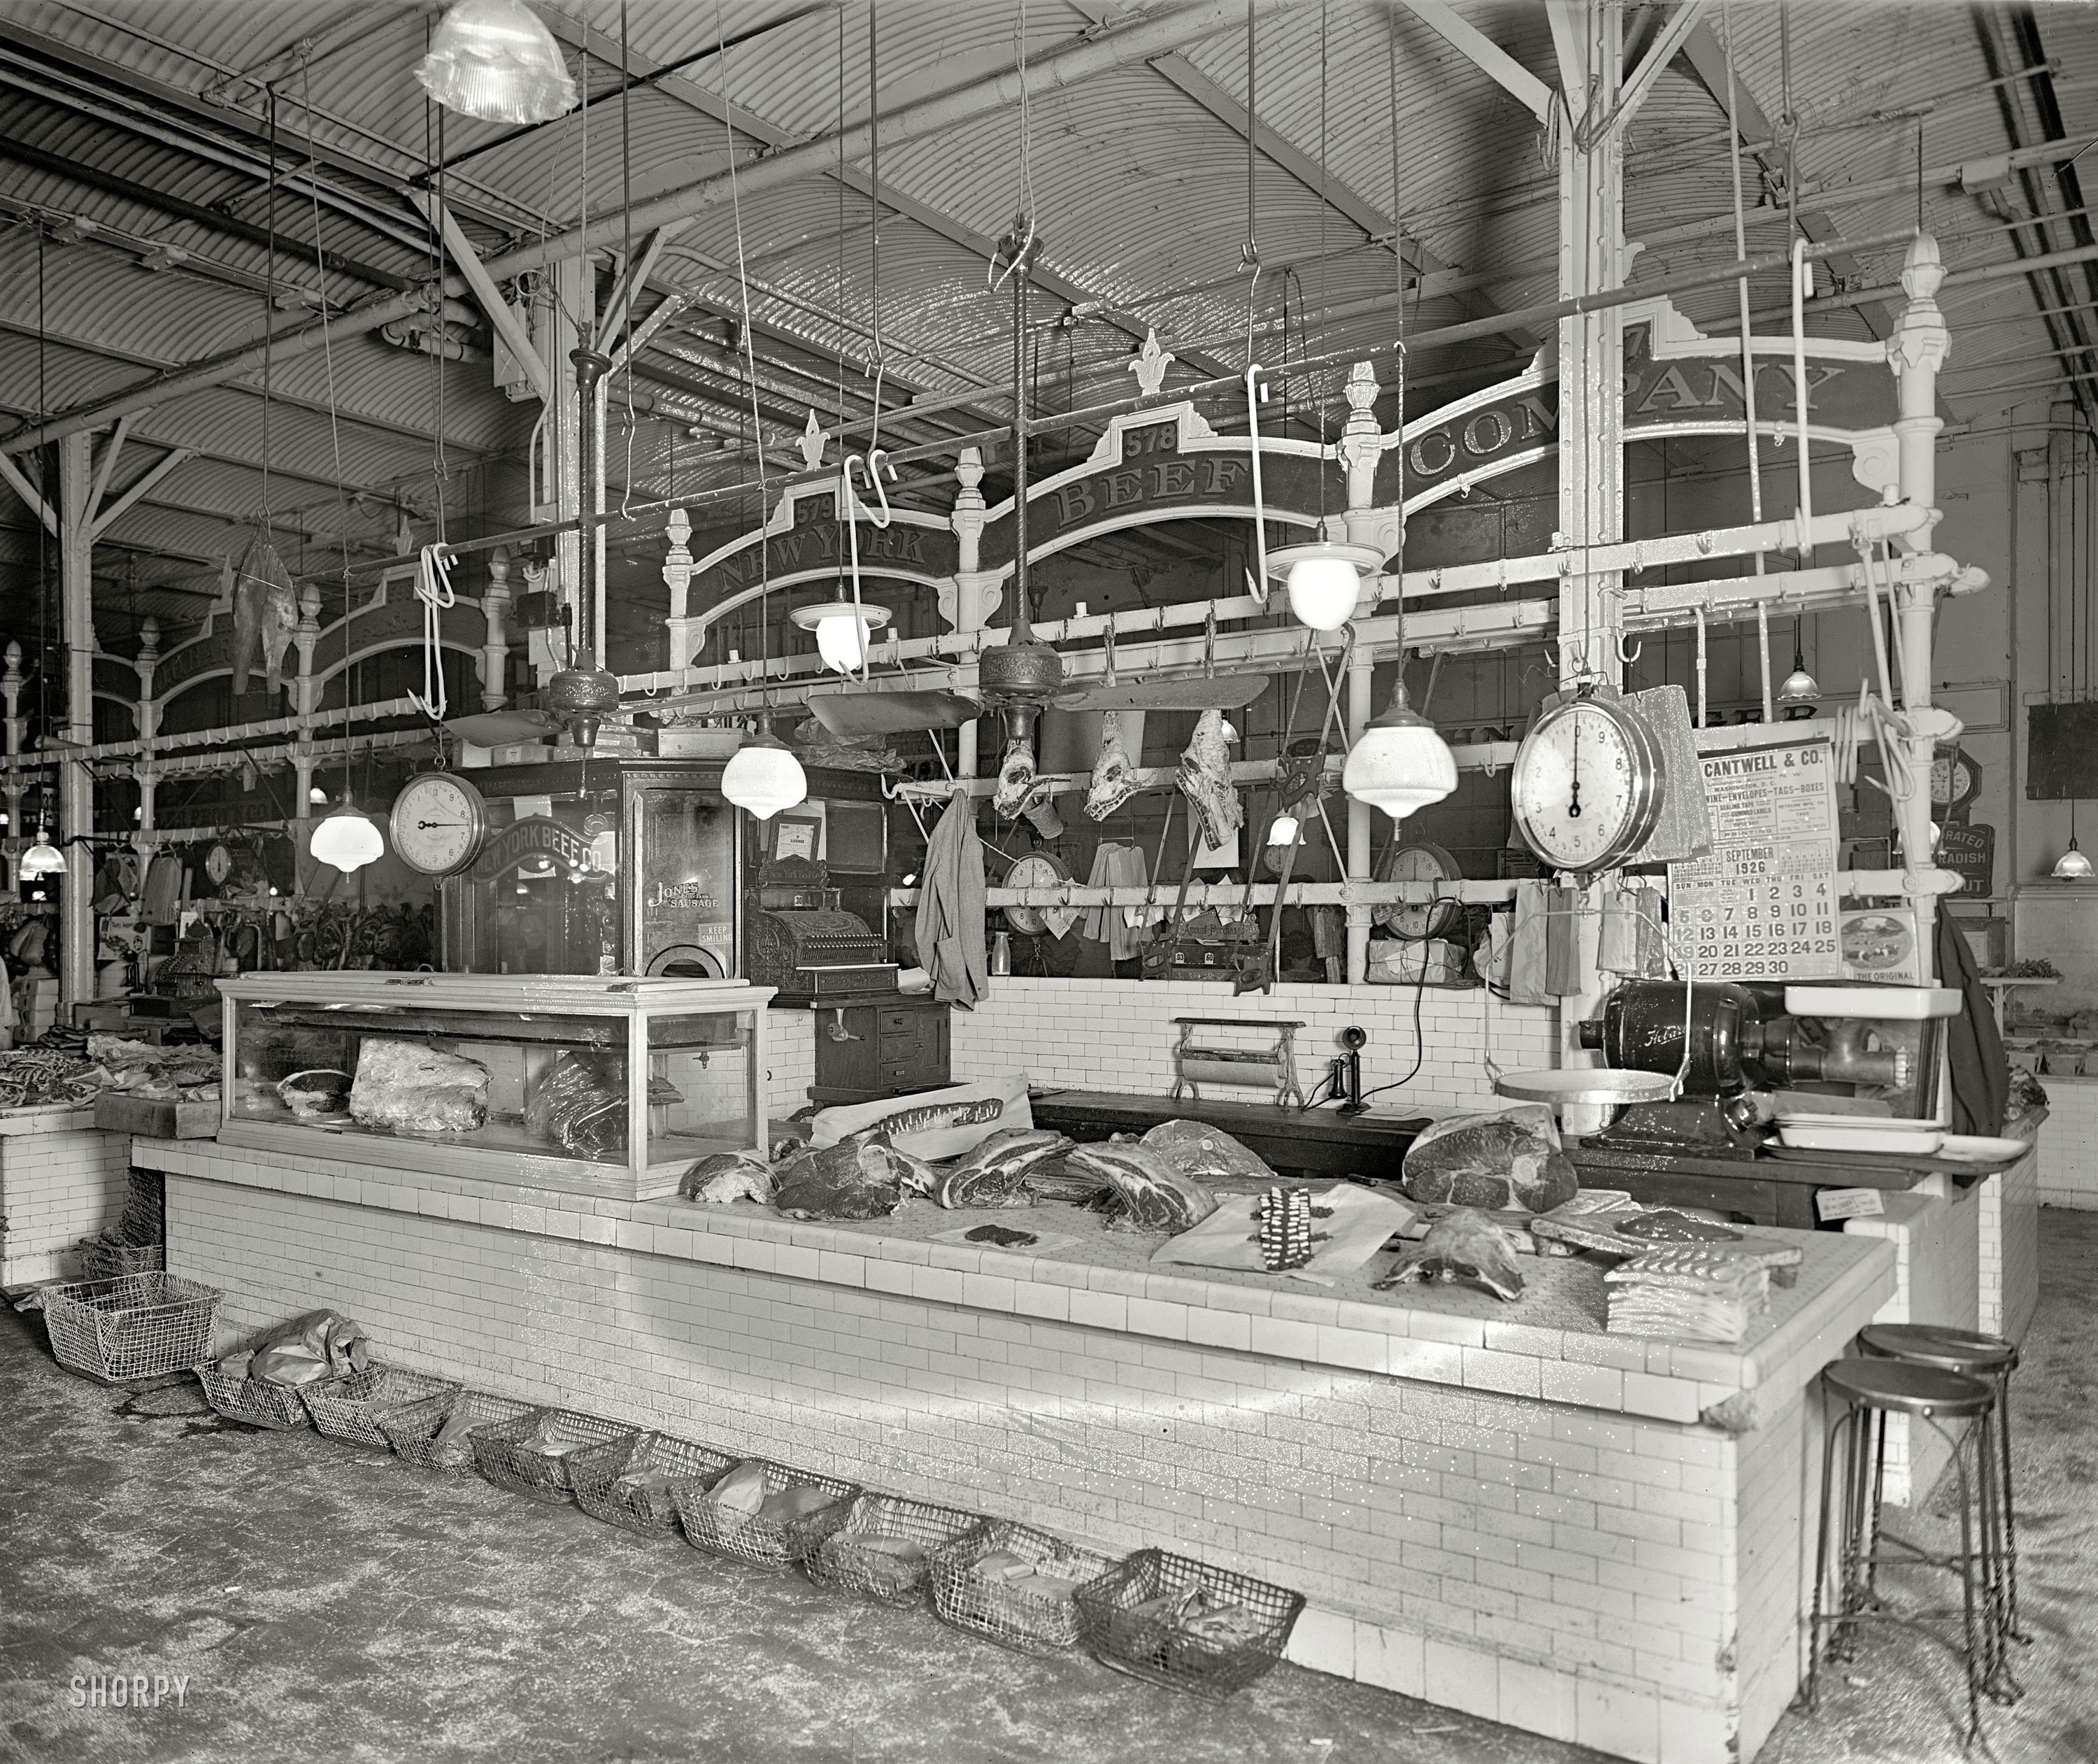 September 1926. Washington, D.C. "Thos. R. Shipp Co. -- C.H. Javins stand." The Charles Javins meat counter, or a neighbor, at Center Market. View full size.